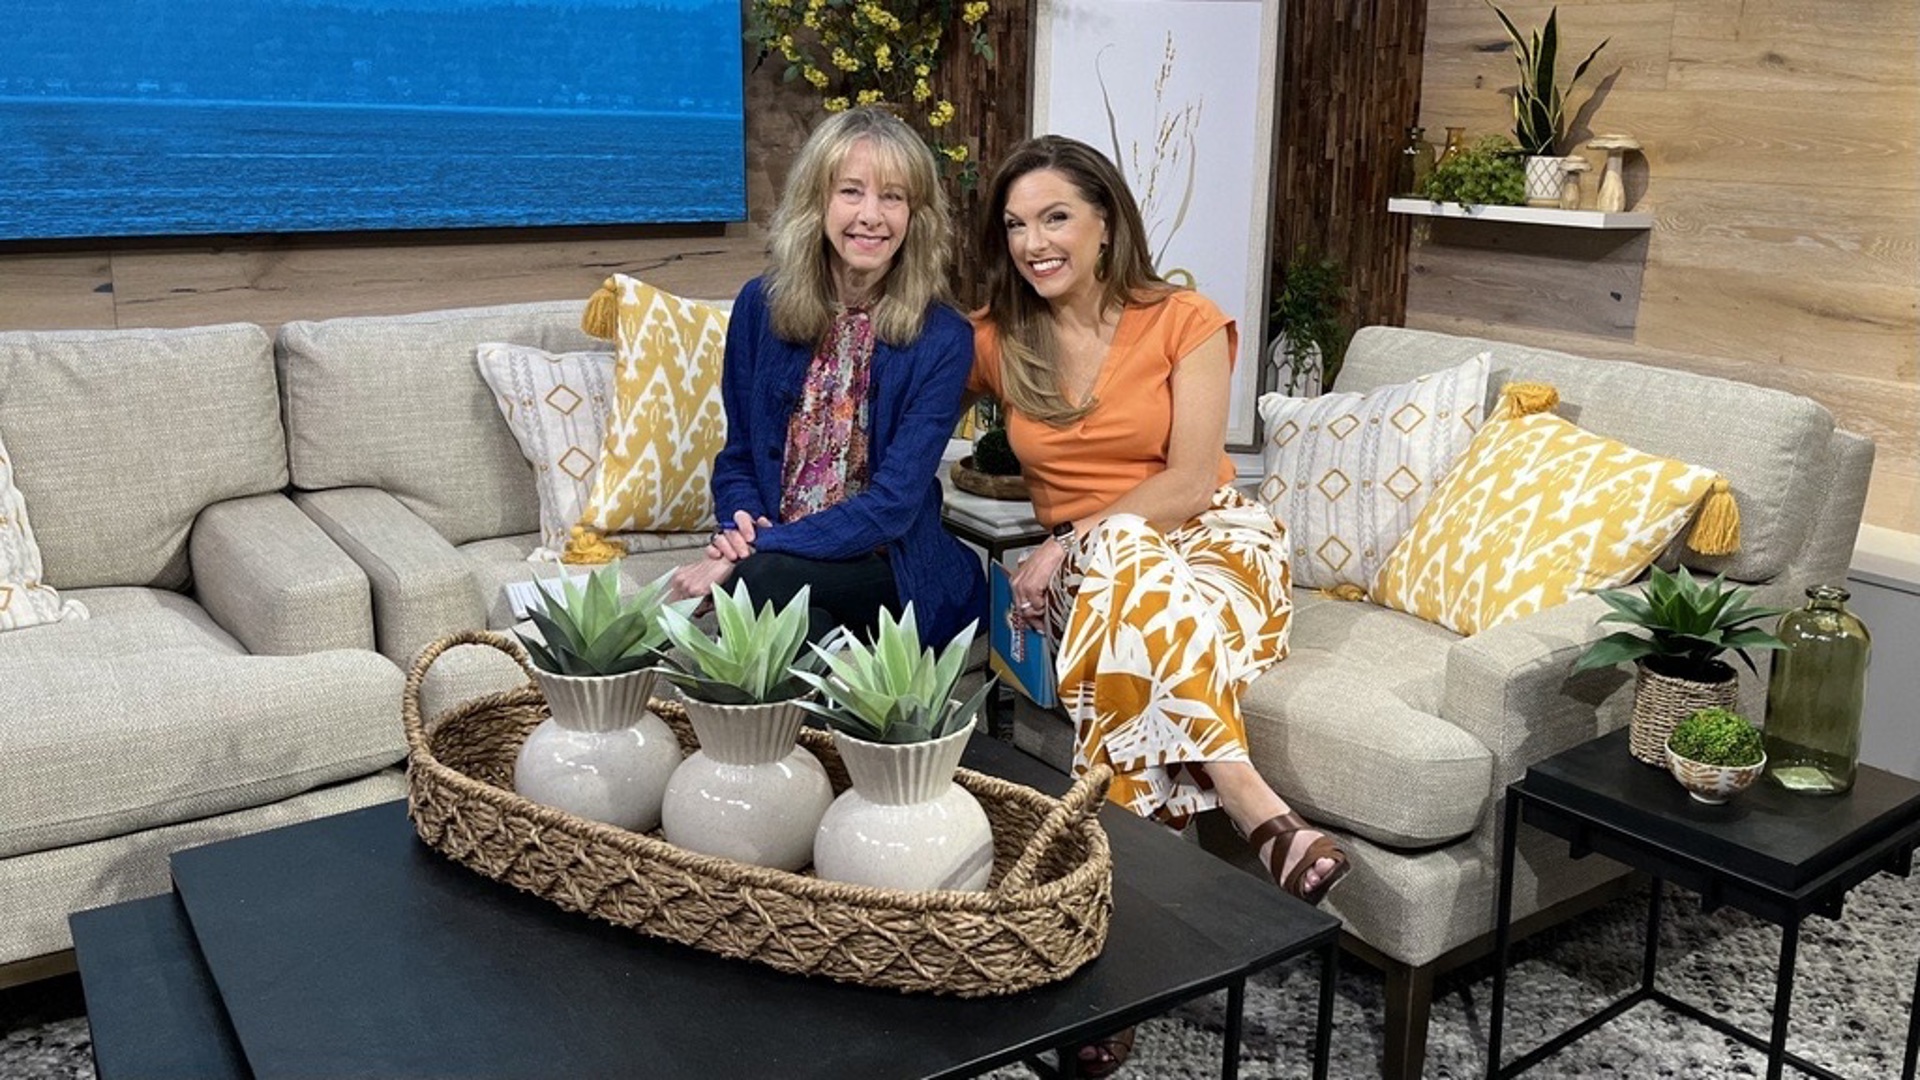 Art Zone’s Nancy Guppy picked 5 of her favorite events to try this month. Art Zone is on Seattle Channel 21 and streaming. #newdaynw